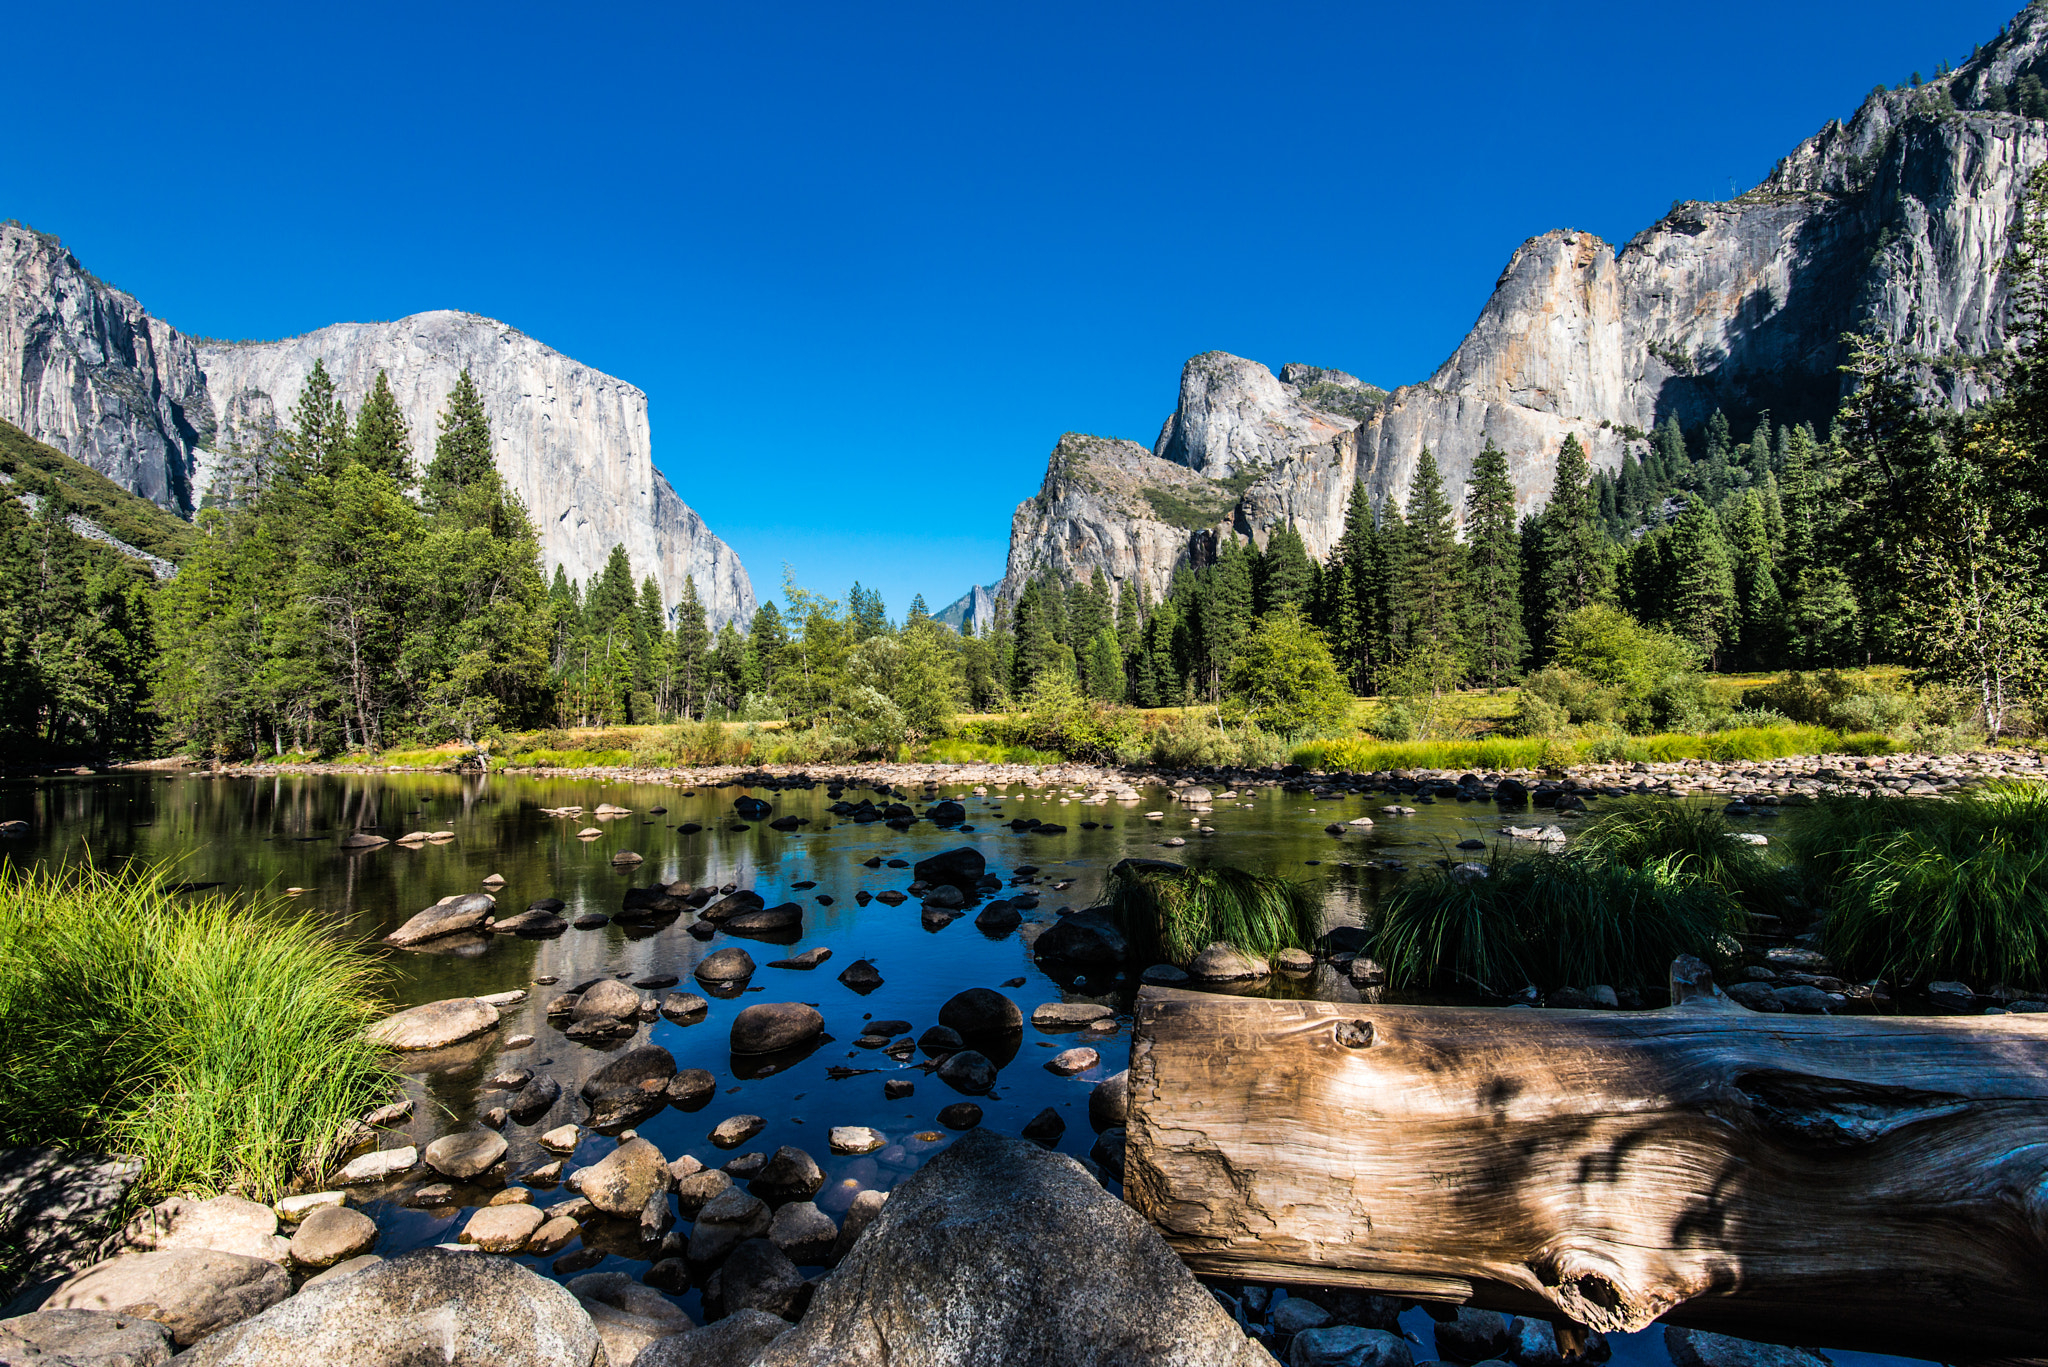 2048x1367 Summer In Yosemite National Park In California's Sierra Nevada Mountains United States Of America 4k Ultra Hd Wallpapers For Desktop 3840x2400 :